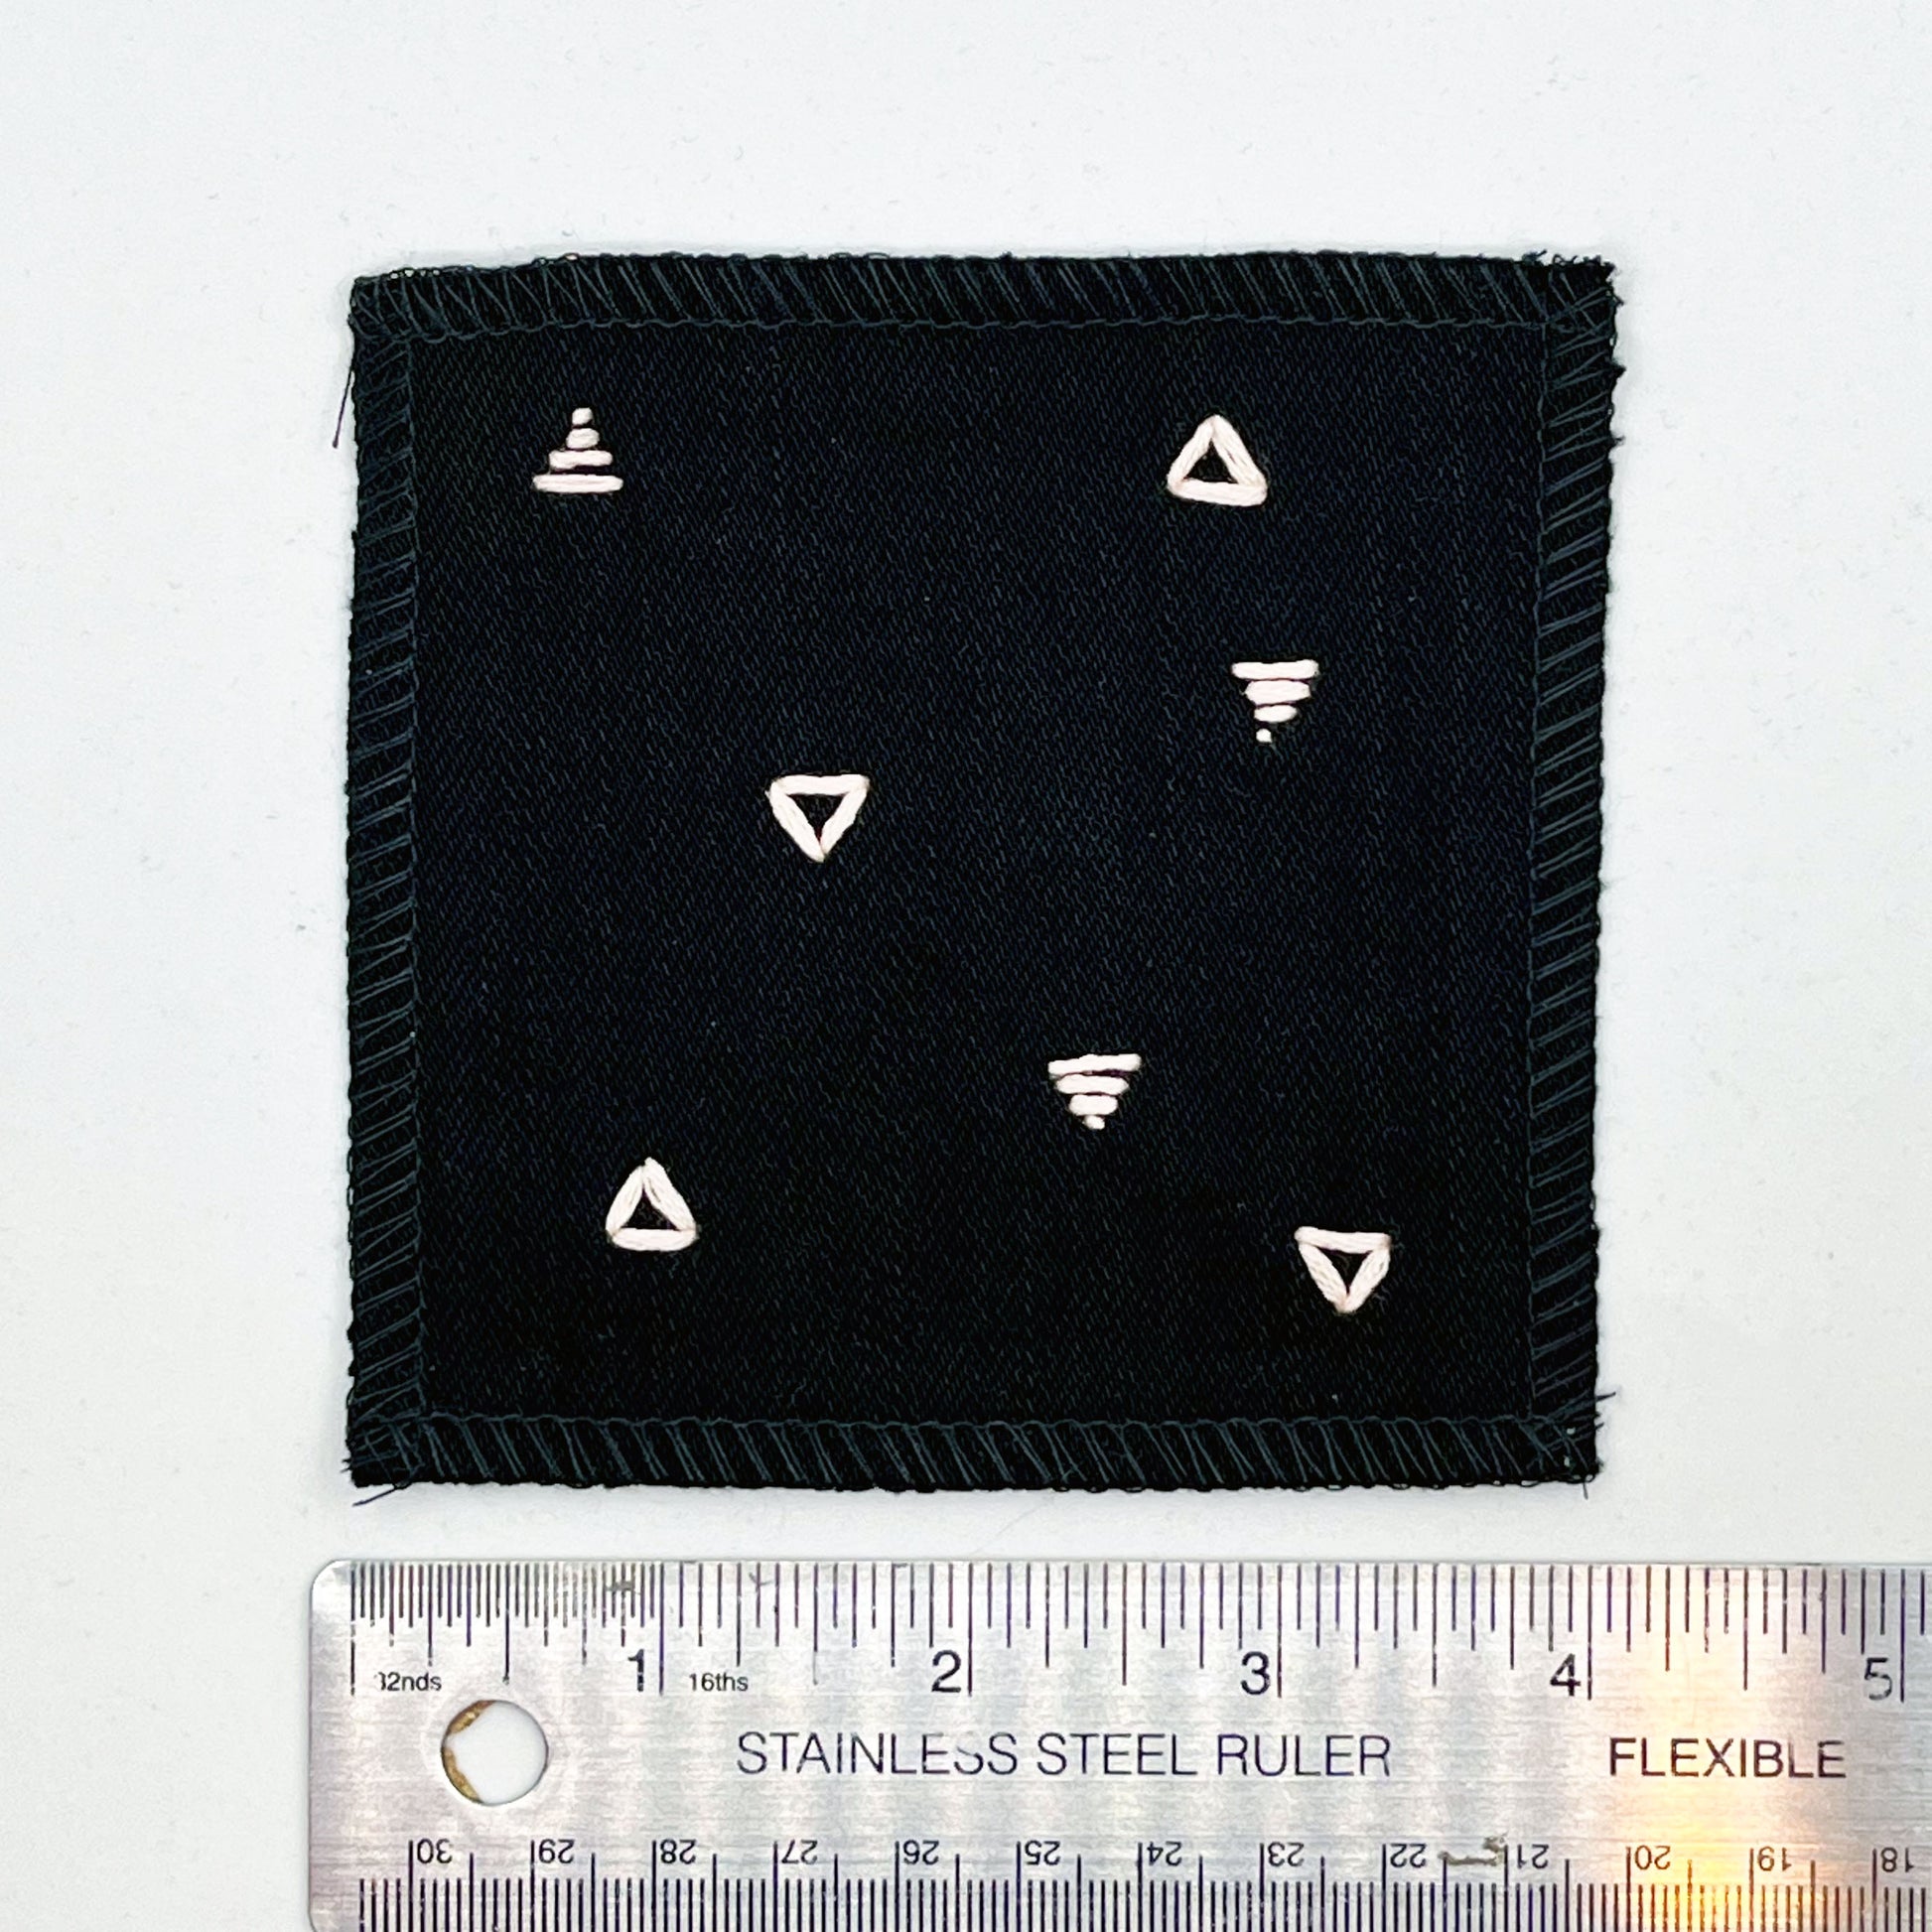 a square patch made out of black canvas, handstitched with scattered peach triangles, some as outlines some with a line fill, with overlocked edges, on a white background, next to a ruler showing a width of 4 inches